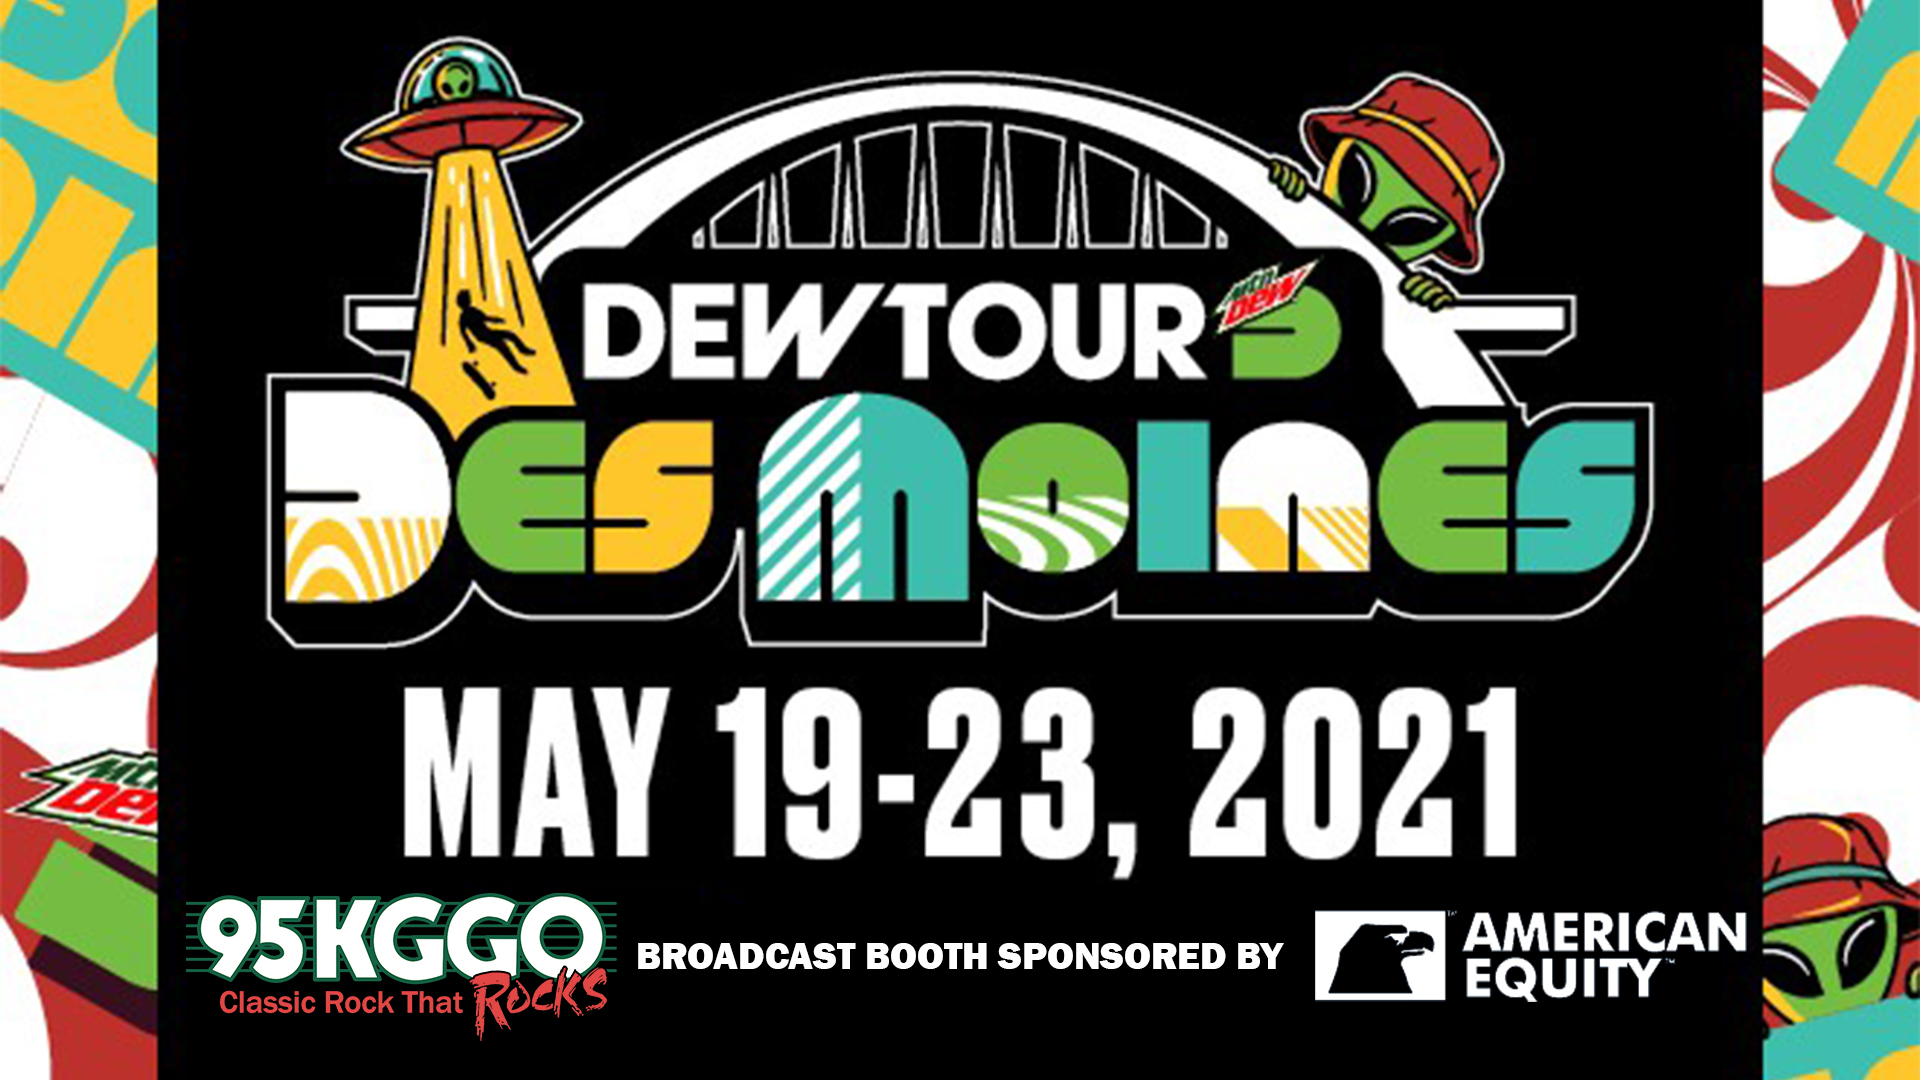 Enter to Win a Dew Tour Skate Deck And Cheap Trick Tickets!